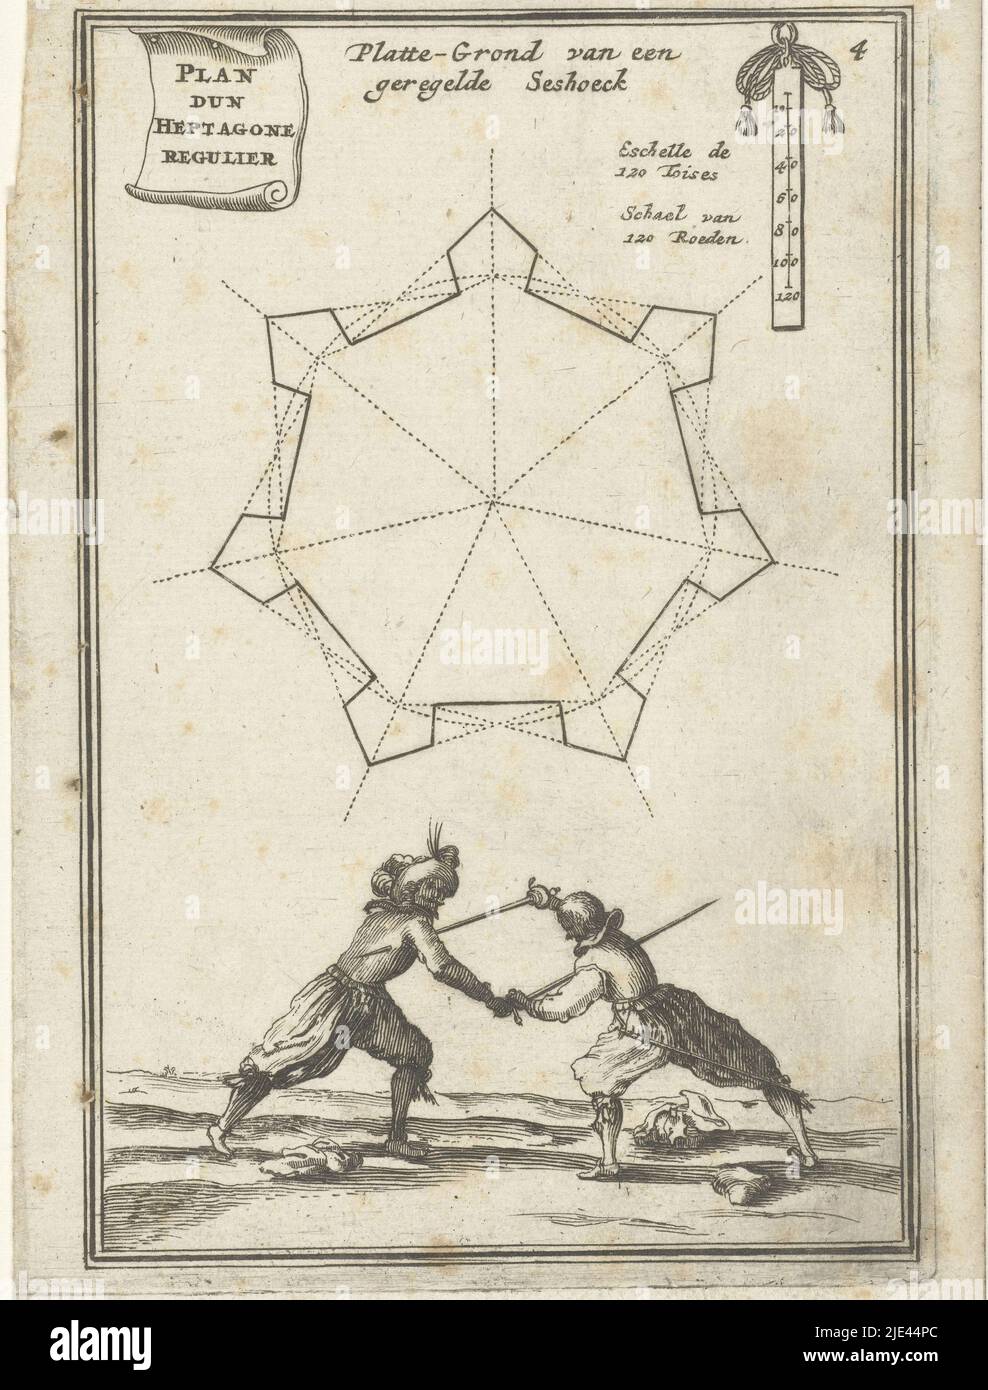 Illustration for 'Den Arbeid van Mars' by Allain Manesson Mallet, Romeyn de Hooghe, 1672, Ground plan for a fortress, fortress or fortification (heptagon). Underneath, two fighting soldiers. In the upper right corner the number 4 (= the number of the page in the book against which the illustration is placed)., print maker: Romeyn de Hooghe, Romeyn de Hooghe, Amsterdam, 1672, paper, etching, h 185 mm × w 111 mm Stock Photo